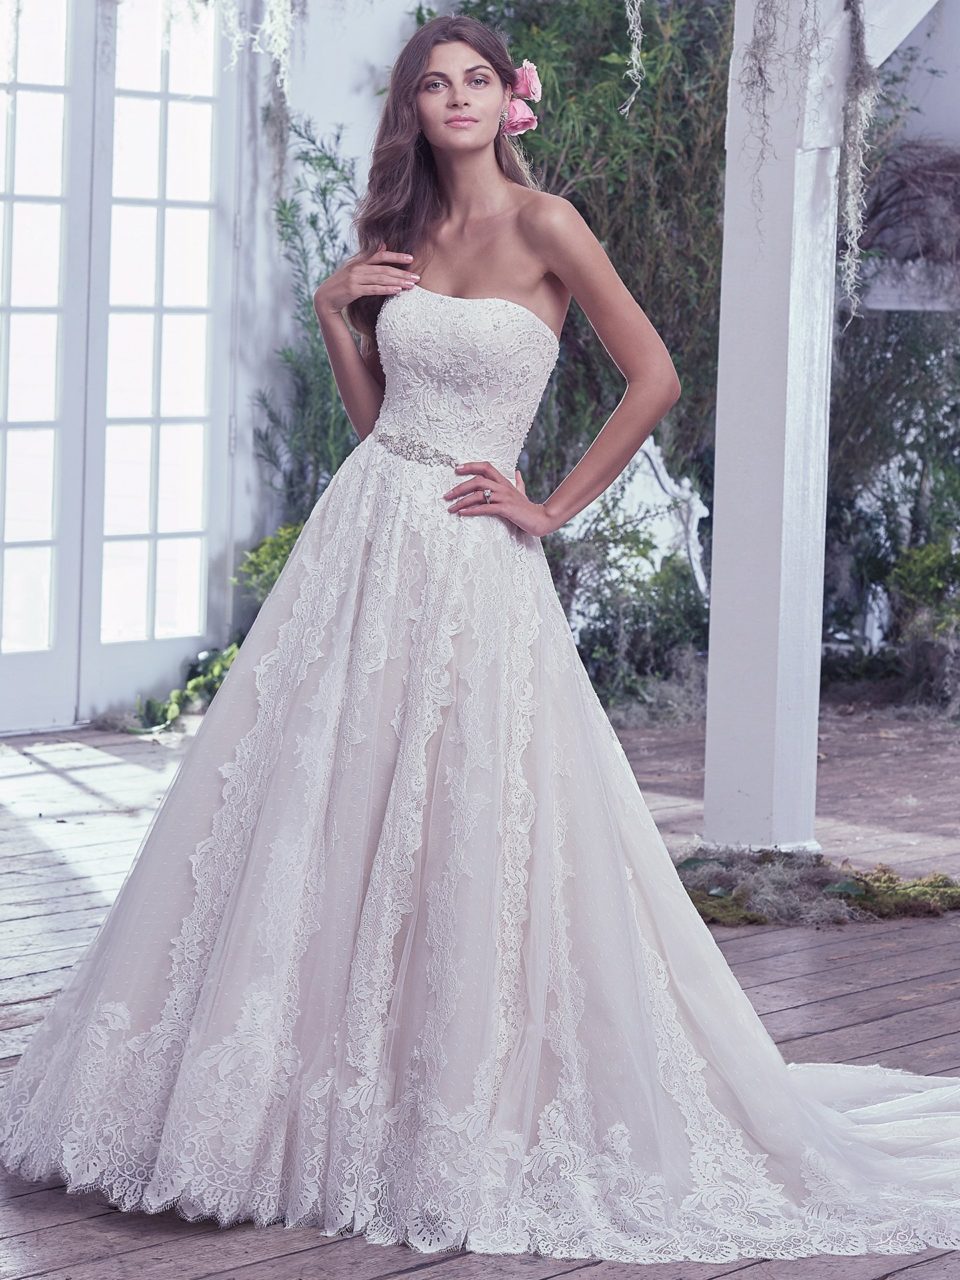 Elegant, Timeless Beauty in the Maggie Sottero 2016